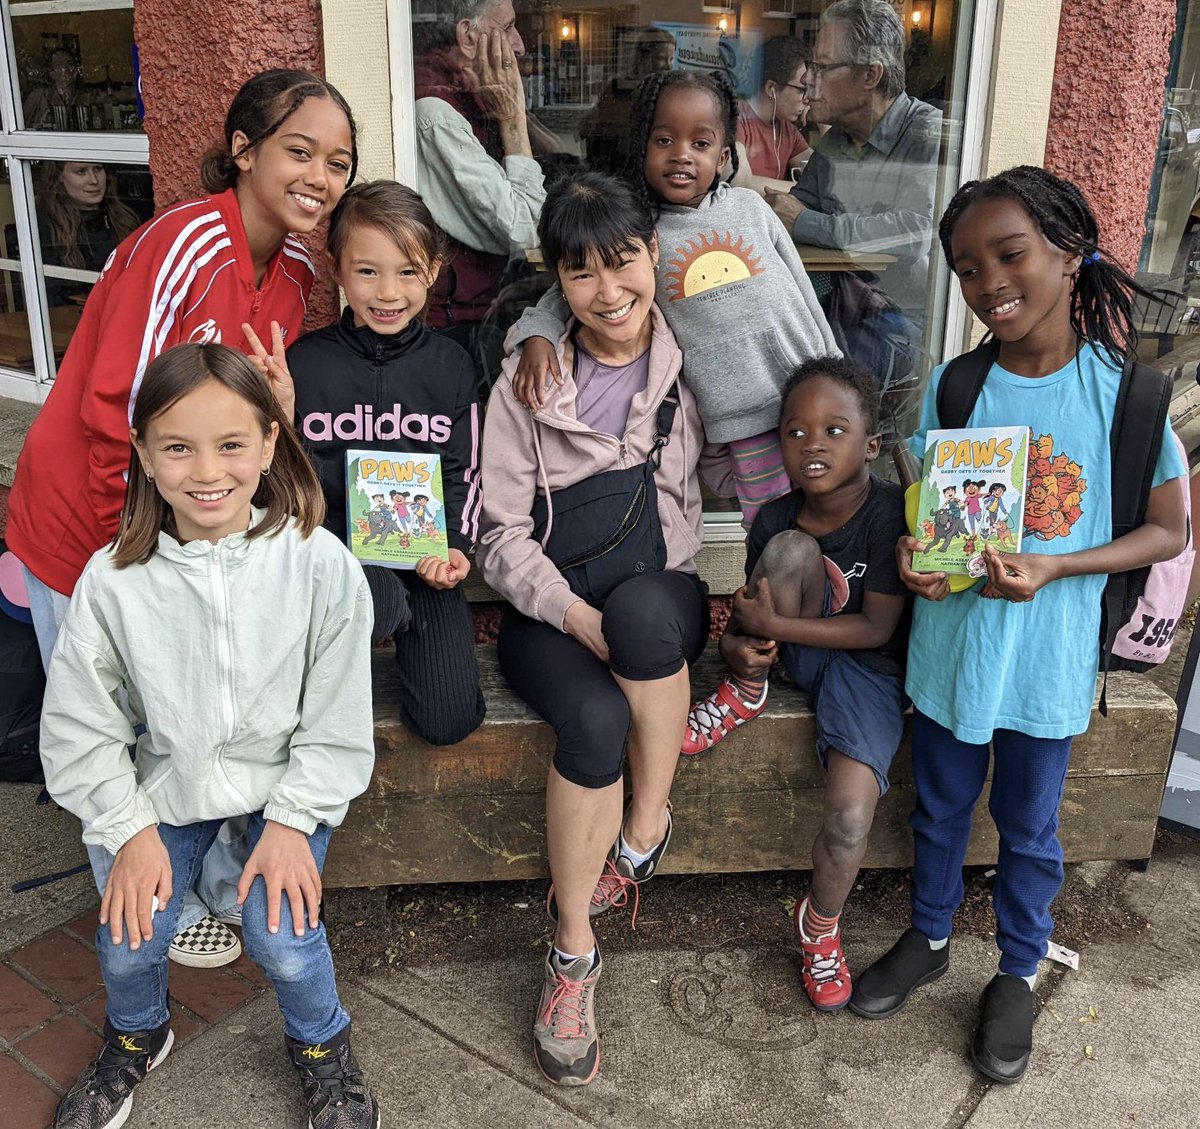 Oh, wow. Yesterday, @msassyk was contacted by a group of kids from our neighbourhood (where our new middle grade series, PAWS, is set) who wanted to meet her. Look at their beautiful faces! 😭 This photo means more to me than I can put into words. This is why I make comics. 😊❤️